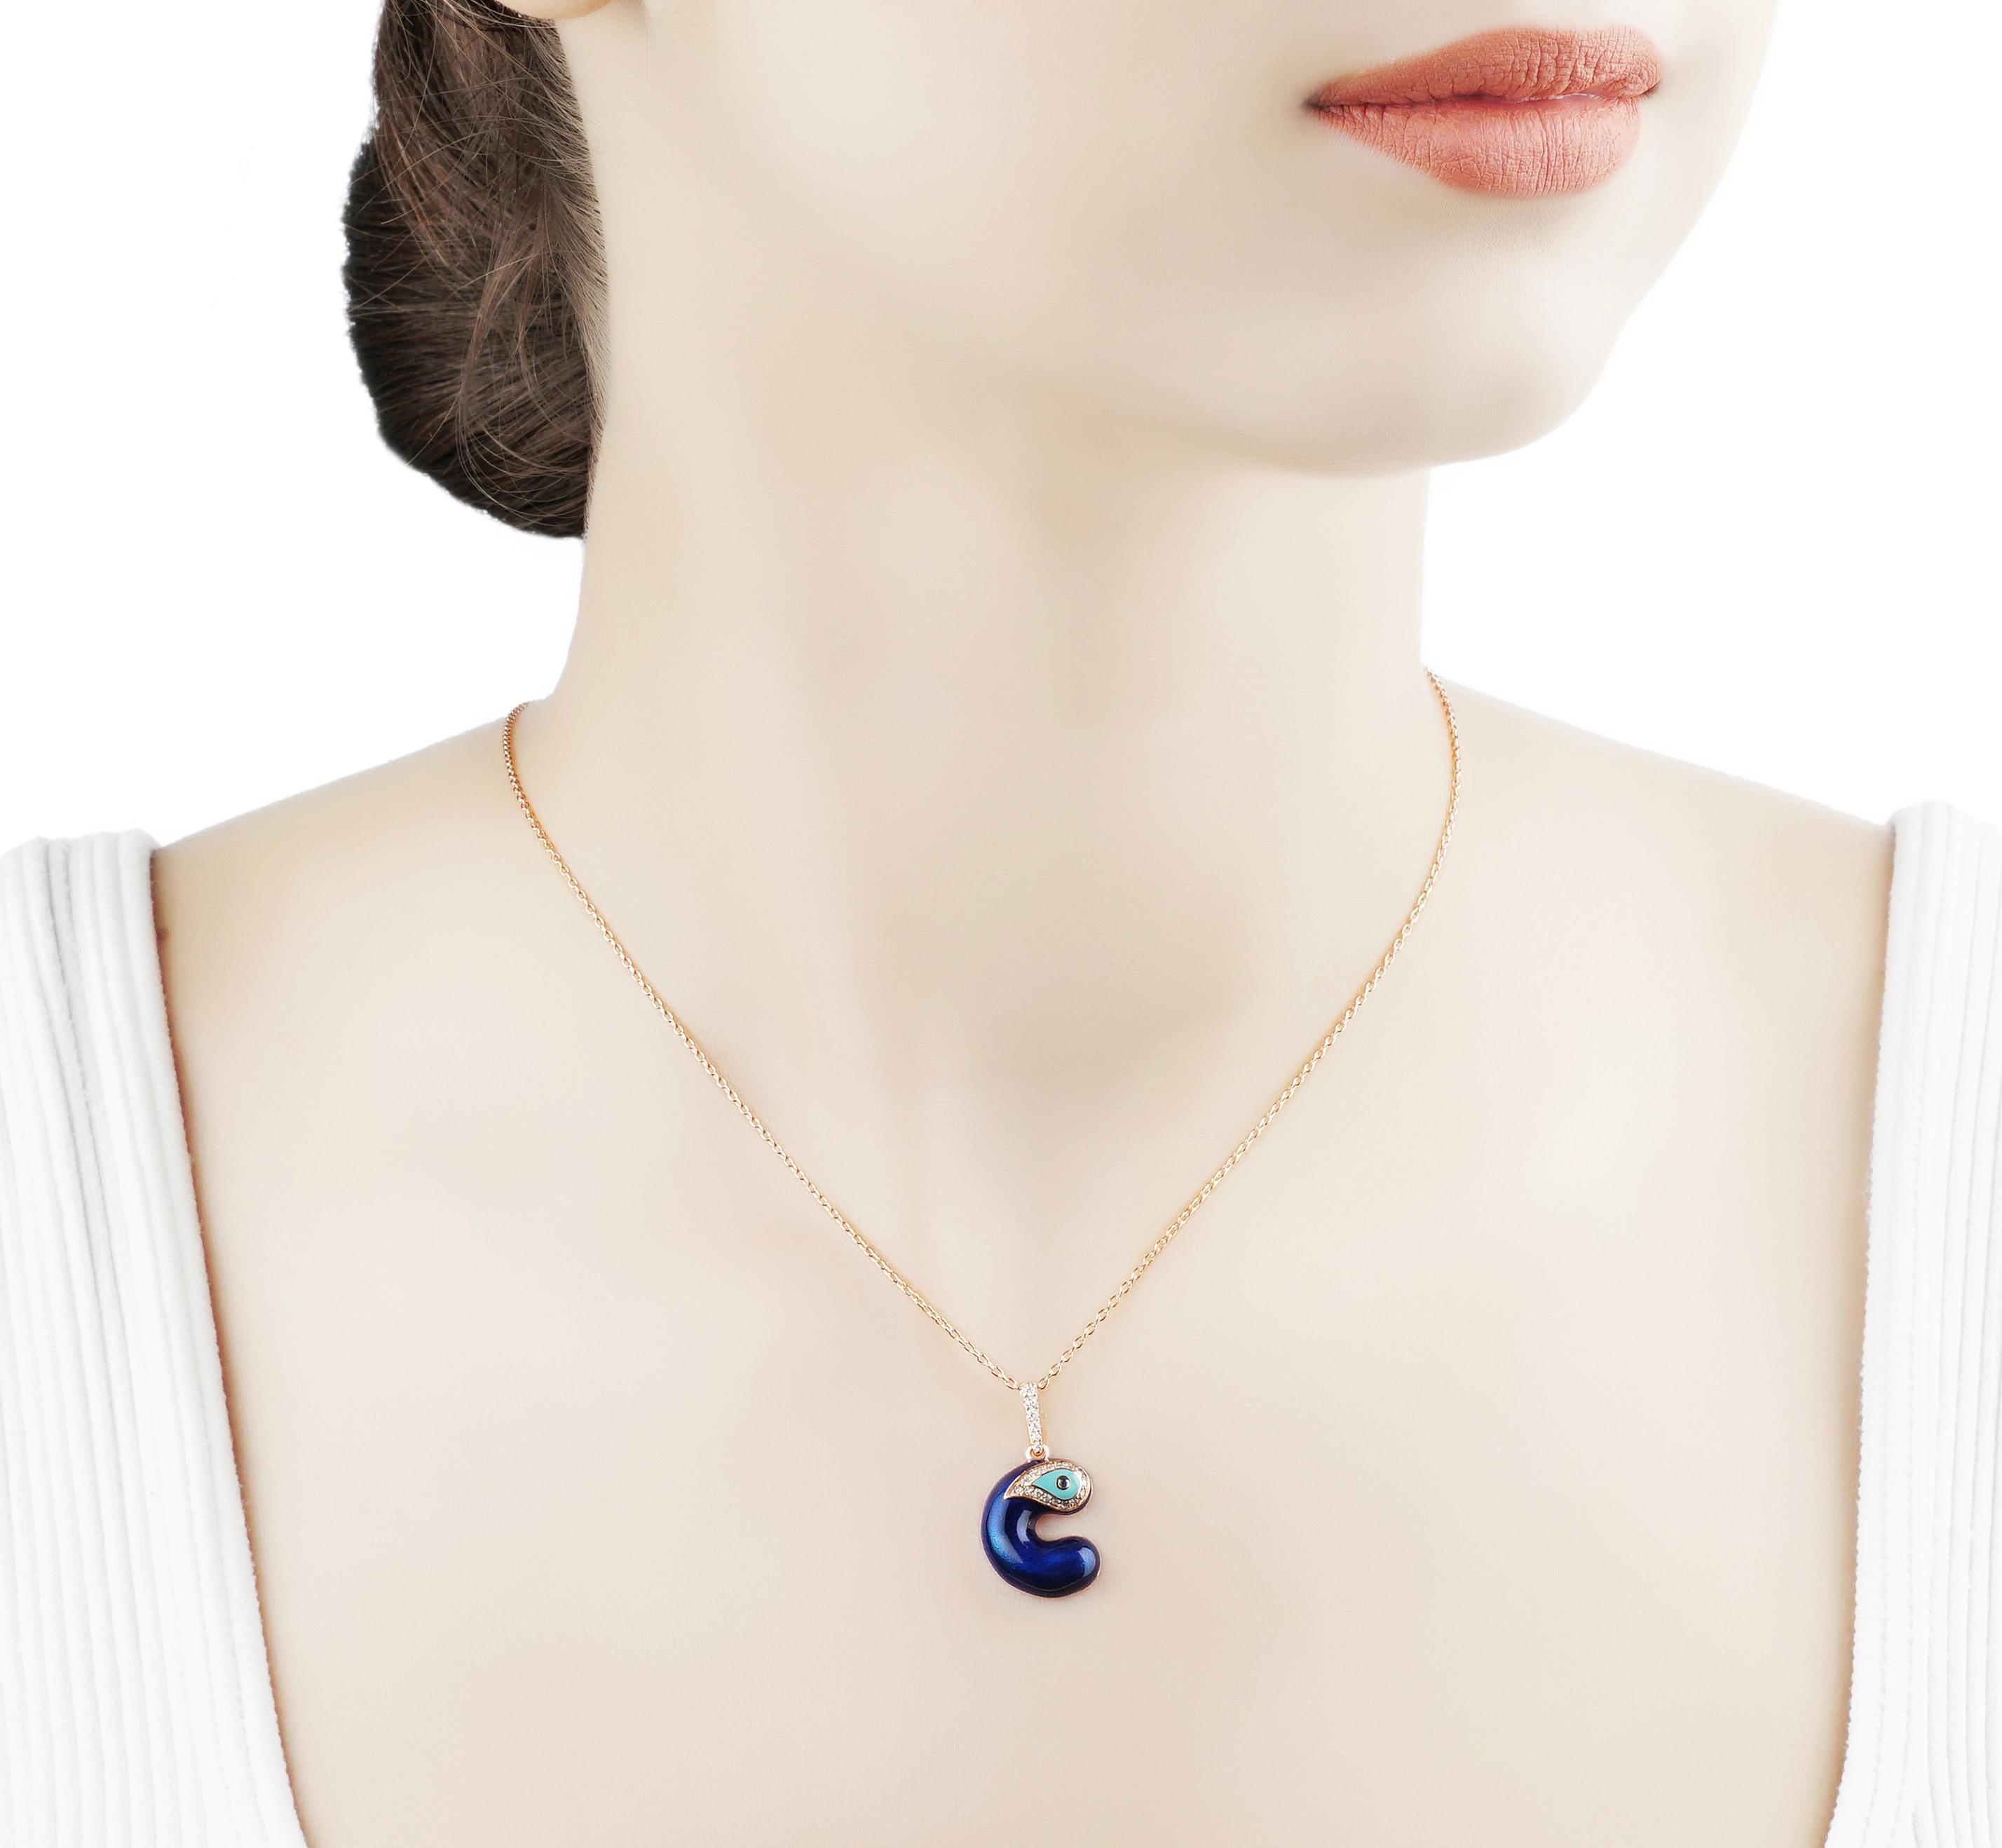 Inspired by The Iconic Evil Eve Symbol Nazarlique Handcrafting Blue Enamel Evil Eye ID Letter Form C Charm Necklace In 14K Yellow Gold With Diamond and Sapphire Is A Striking Example Of The Sentimental Style.

Looks Super Sophisticated And Cool On